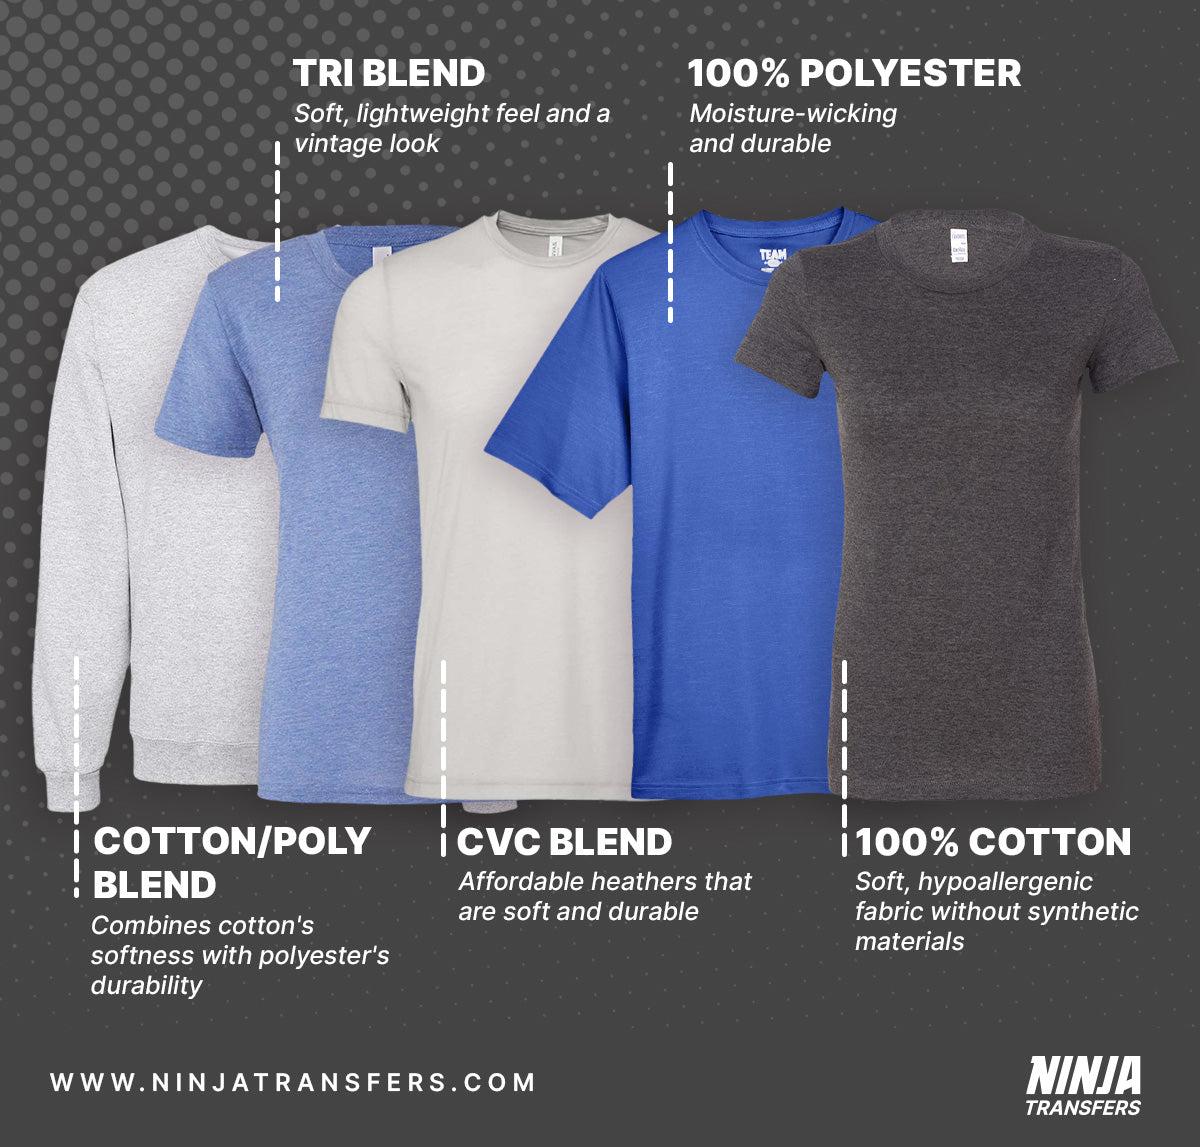 infographic showing 5 different types of t-shirts w/ blended/heather fabric, labeled w/ basic info